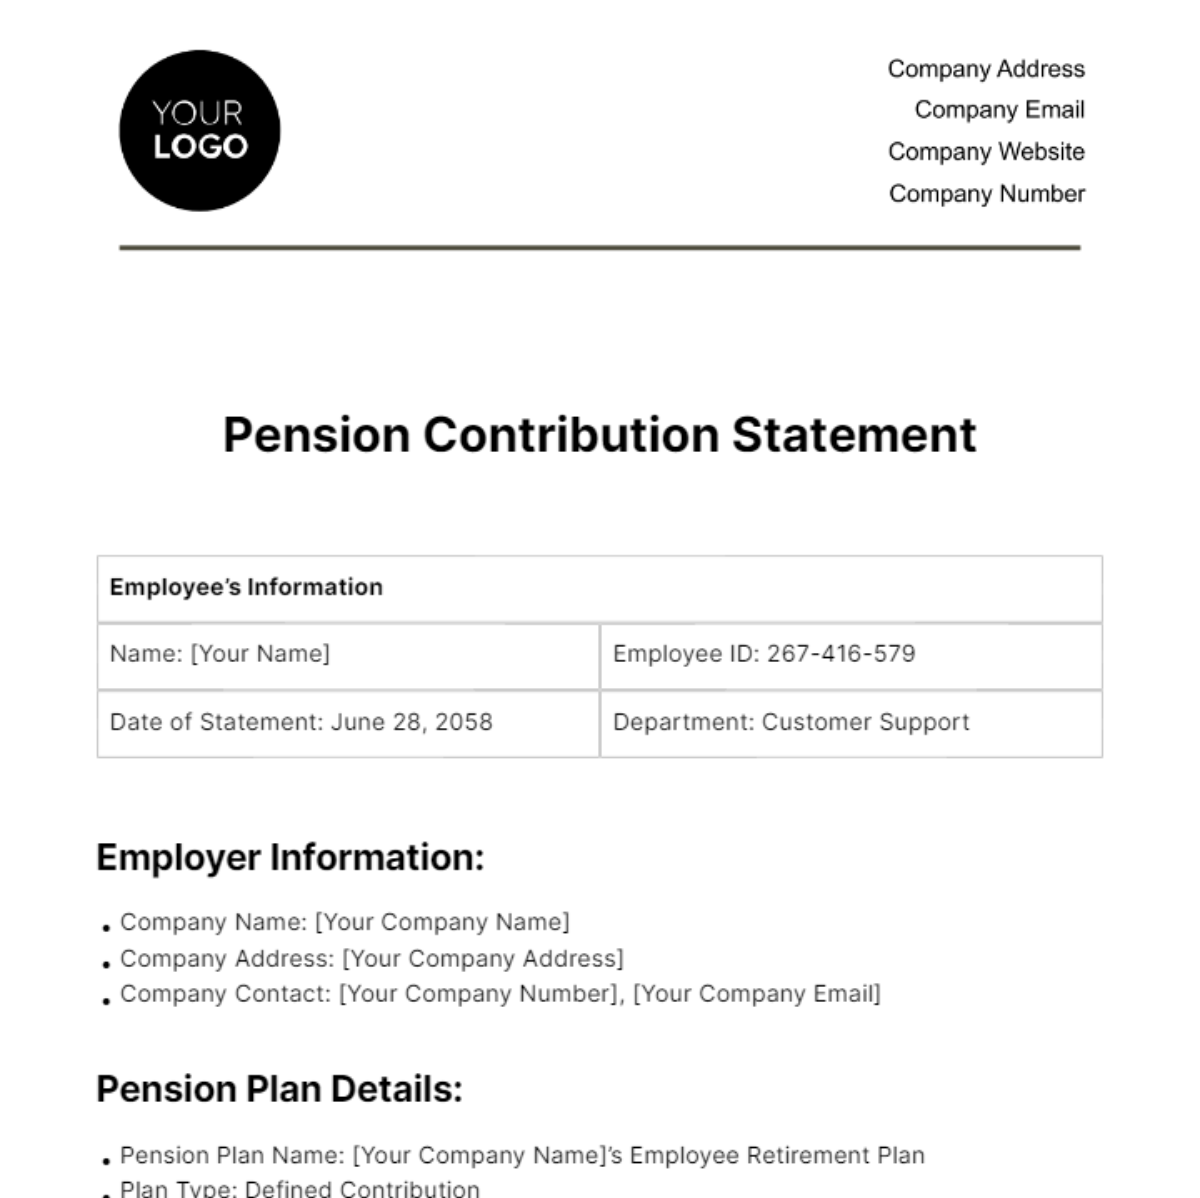 Pension Contribution Statement HR Template